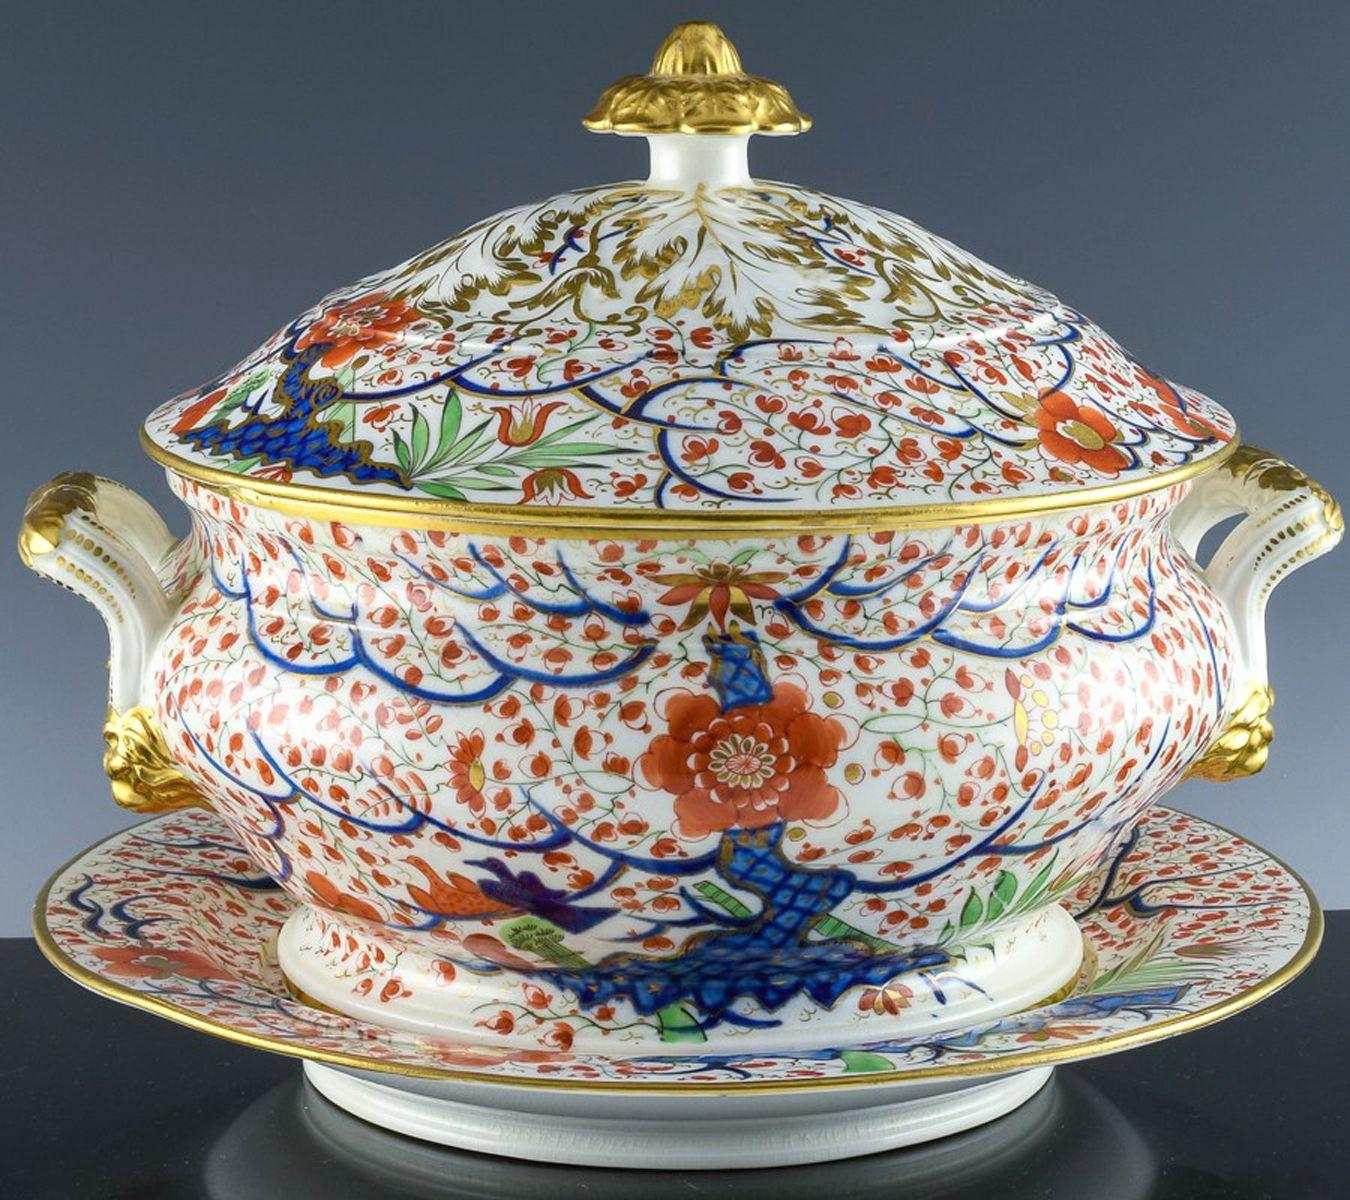 English Regency Period Chamberlain Worcester Porcelain Soup Tureen, Cover and Stand For Sale